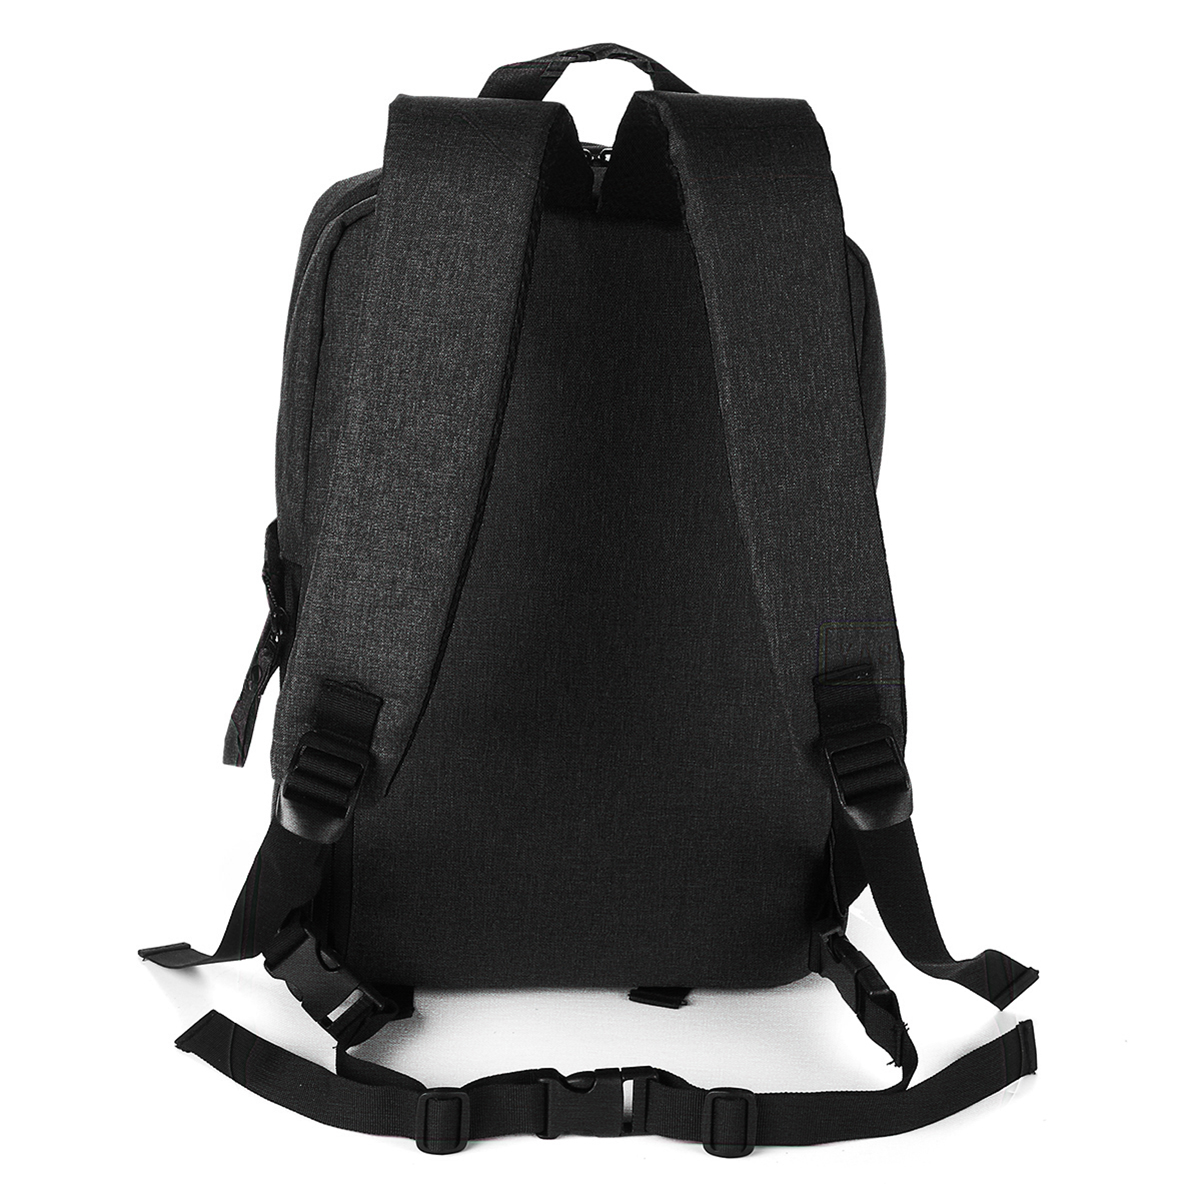 Find YACIO Water Resistant Backpack for DSLR Camera Lens Accessories with Insert Bag Rain Cover for Sale on Gipsybee.com with cryptocurrencies